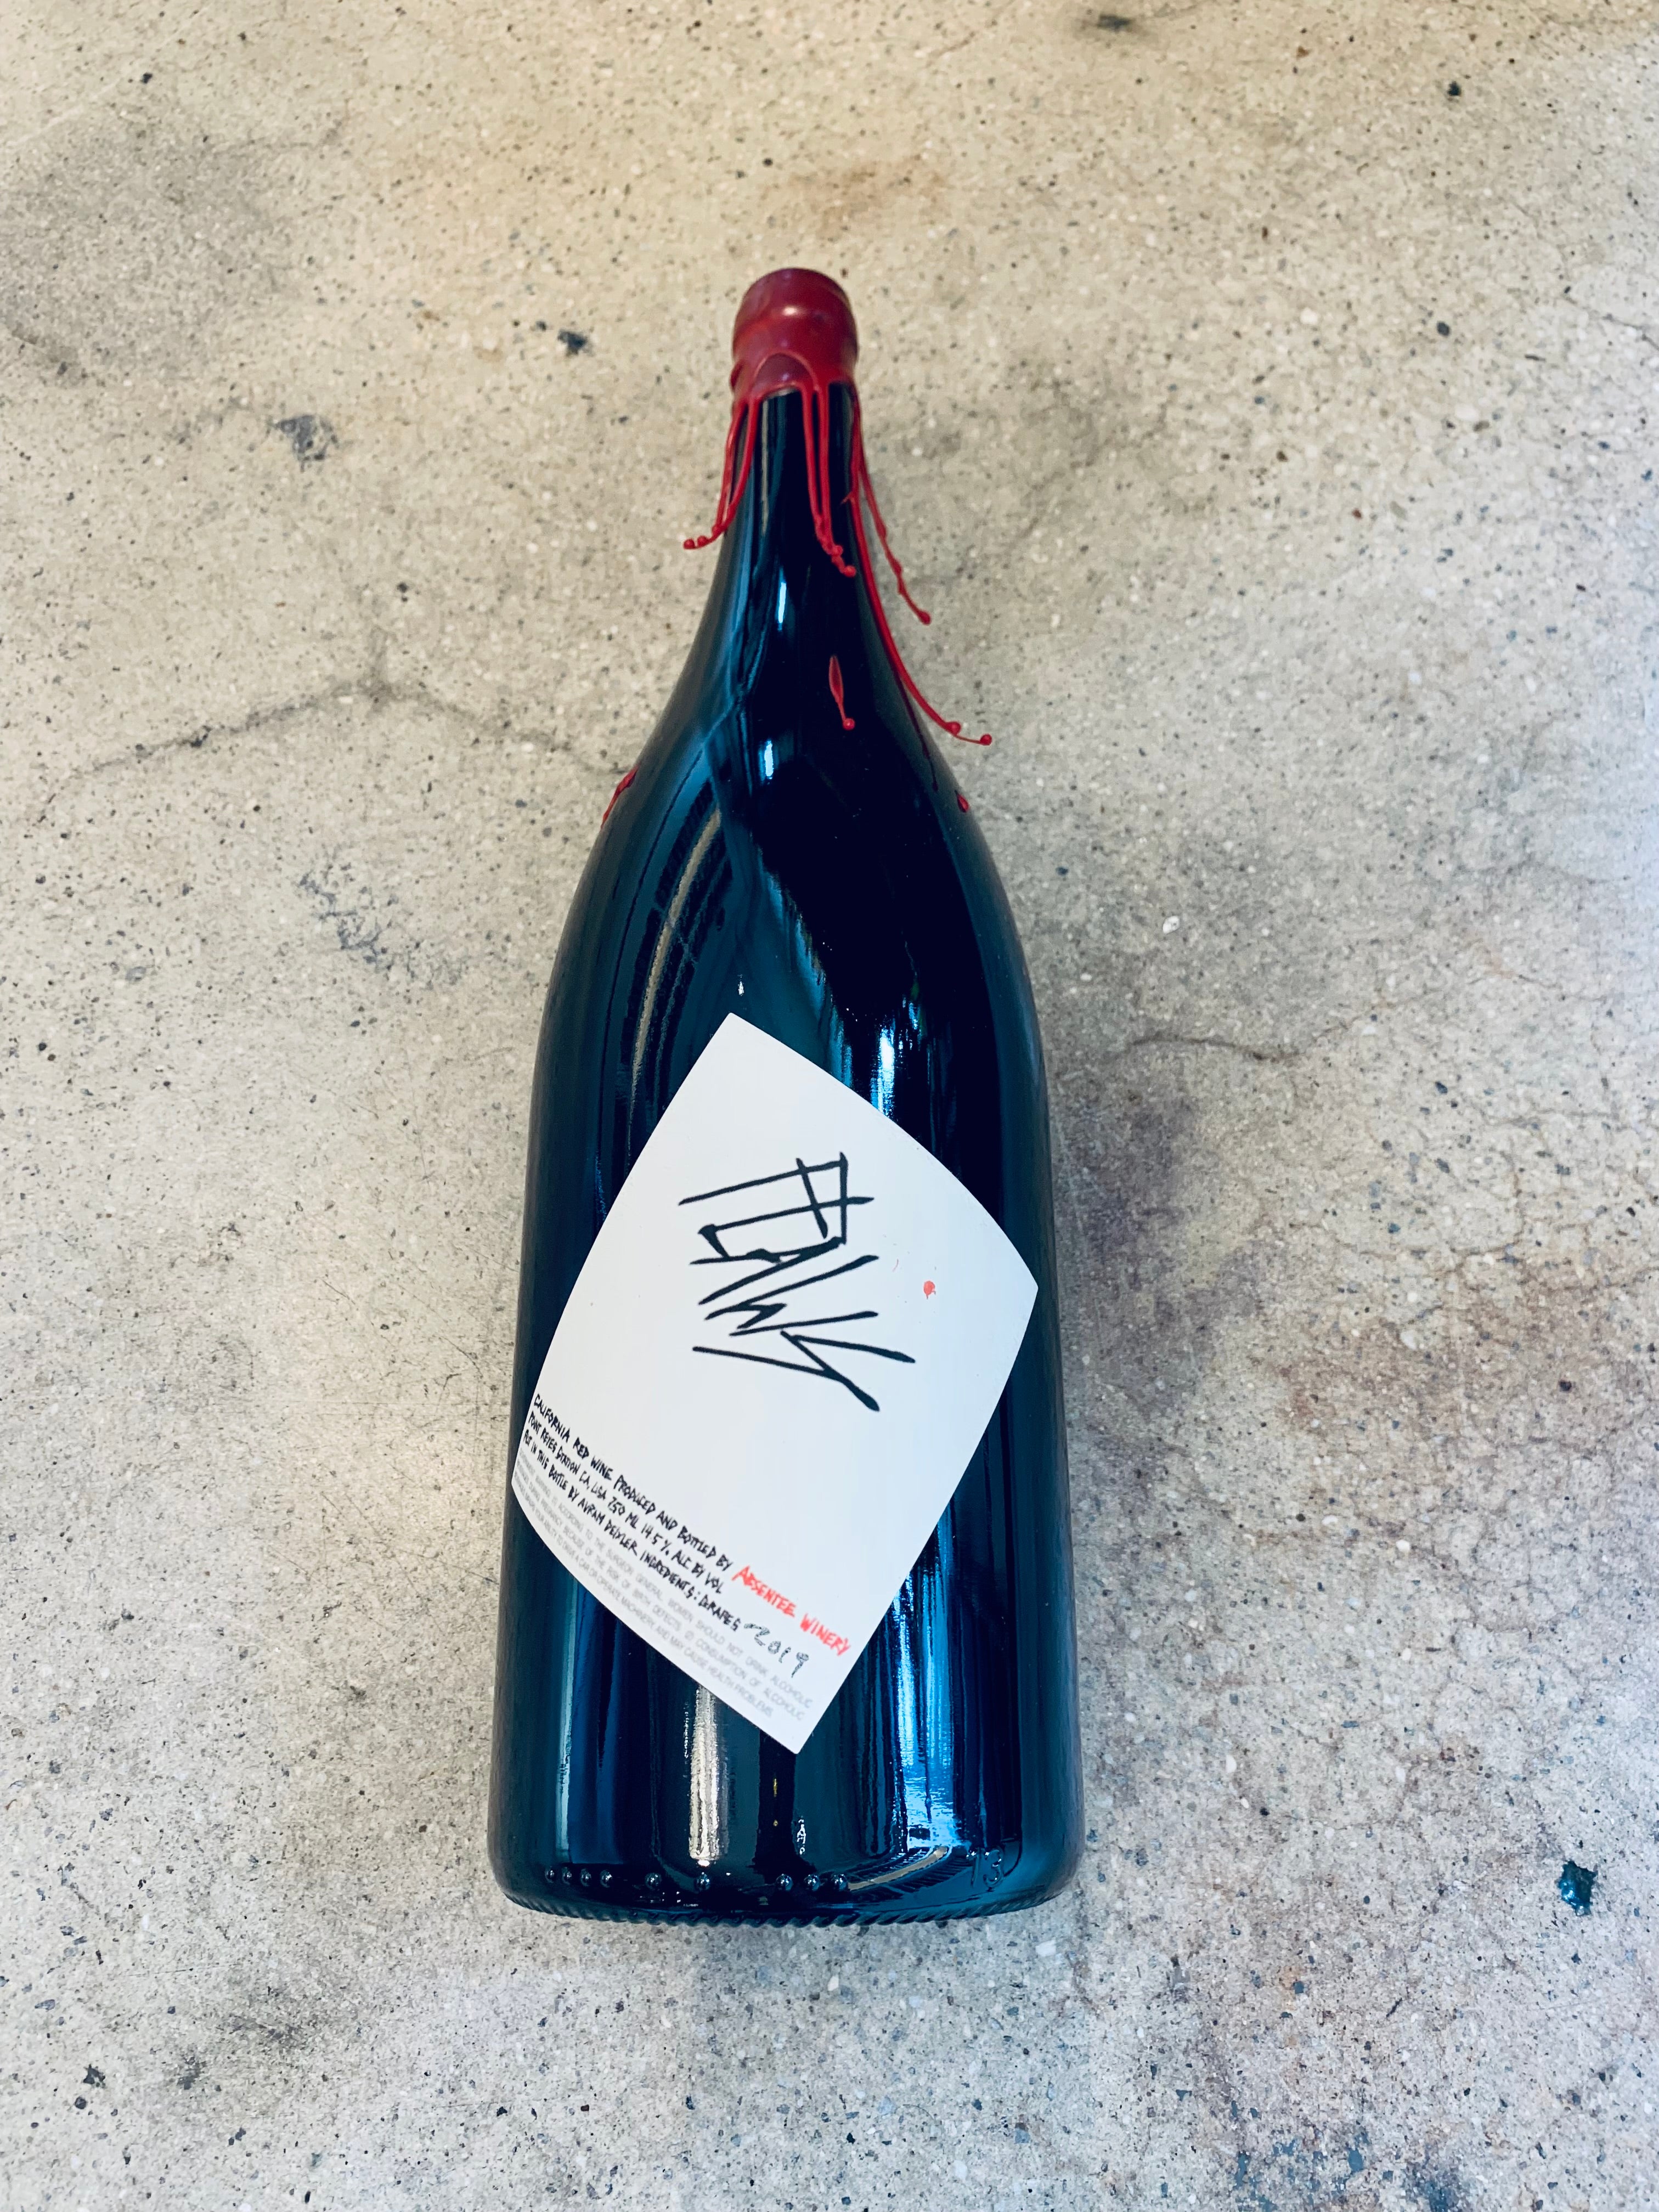 Absentee Winery - "FLAWS" Magnum California Red 2019 1.5L (14.5% ABV)